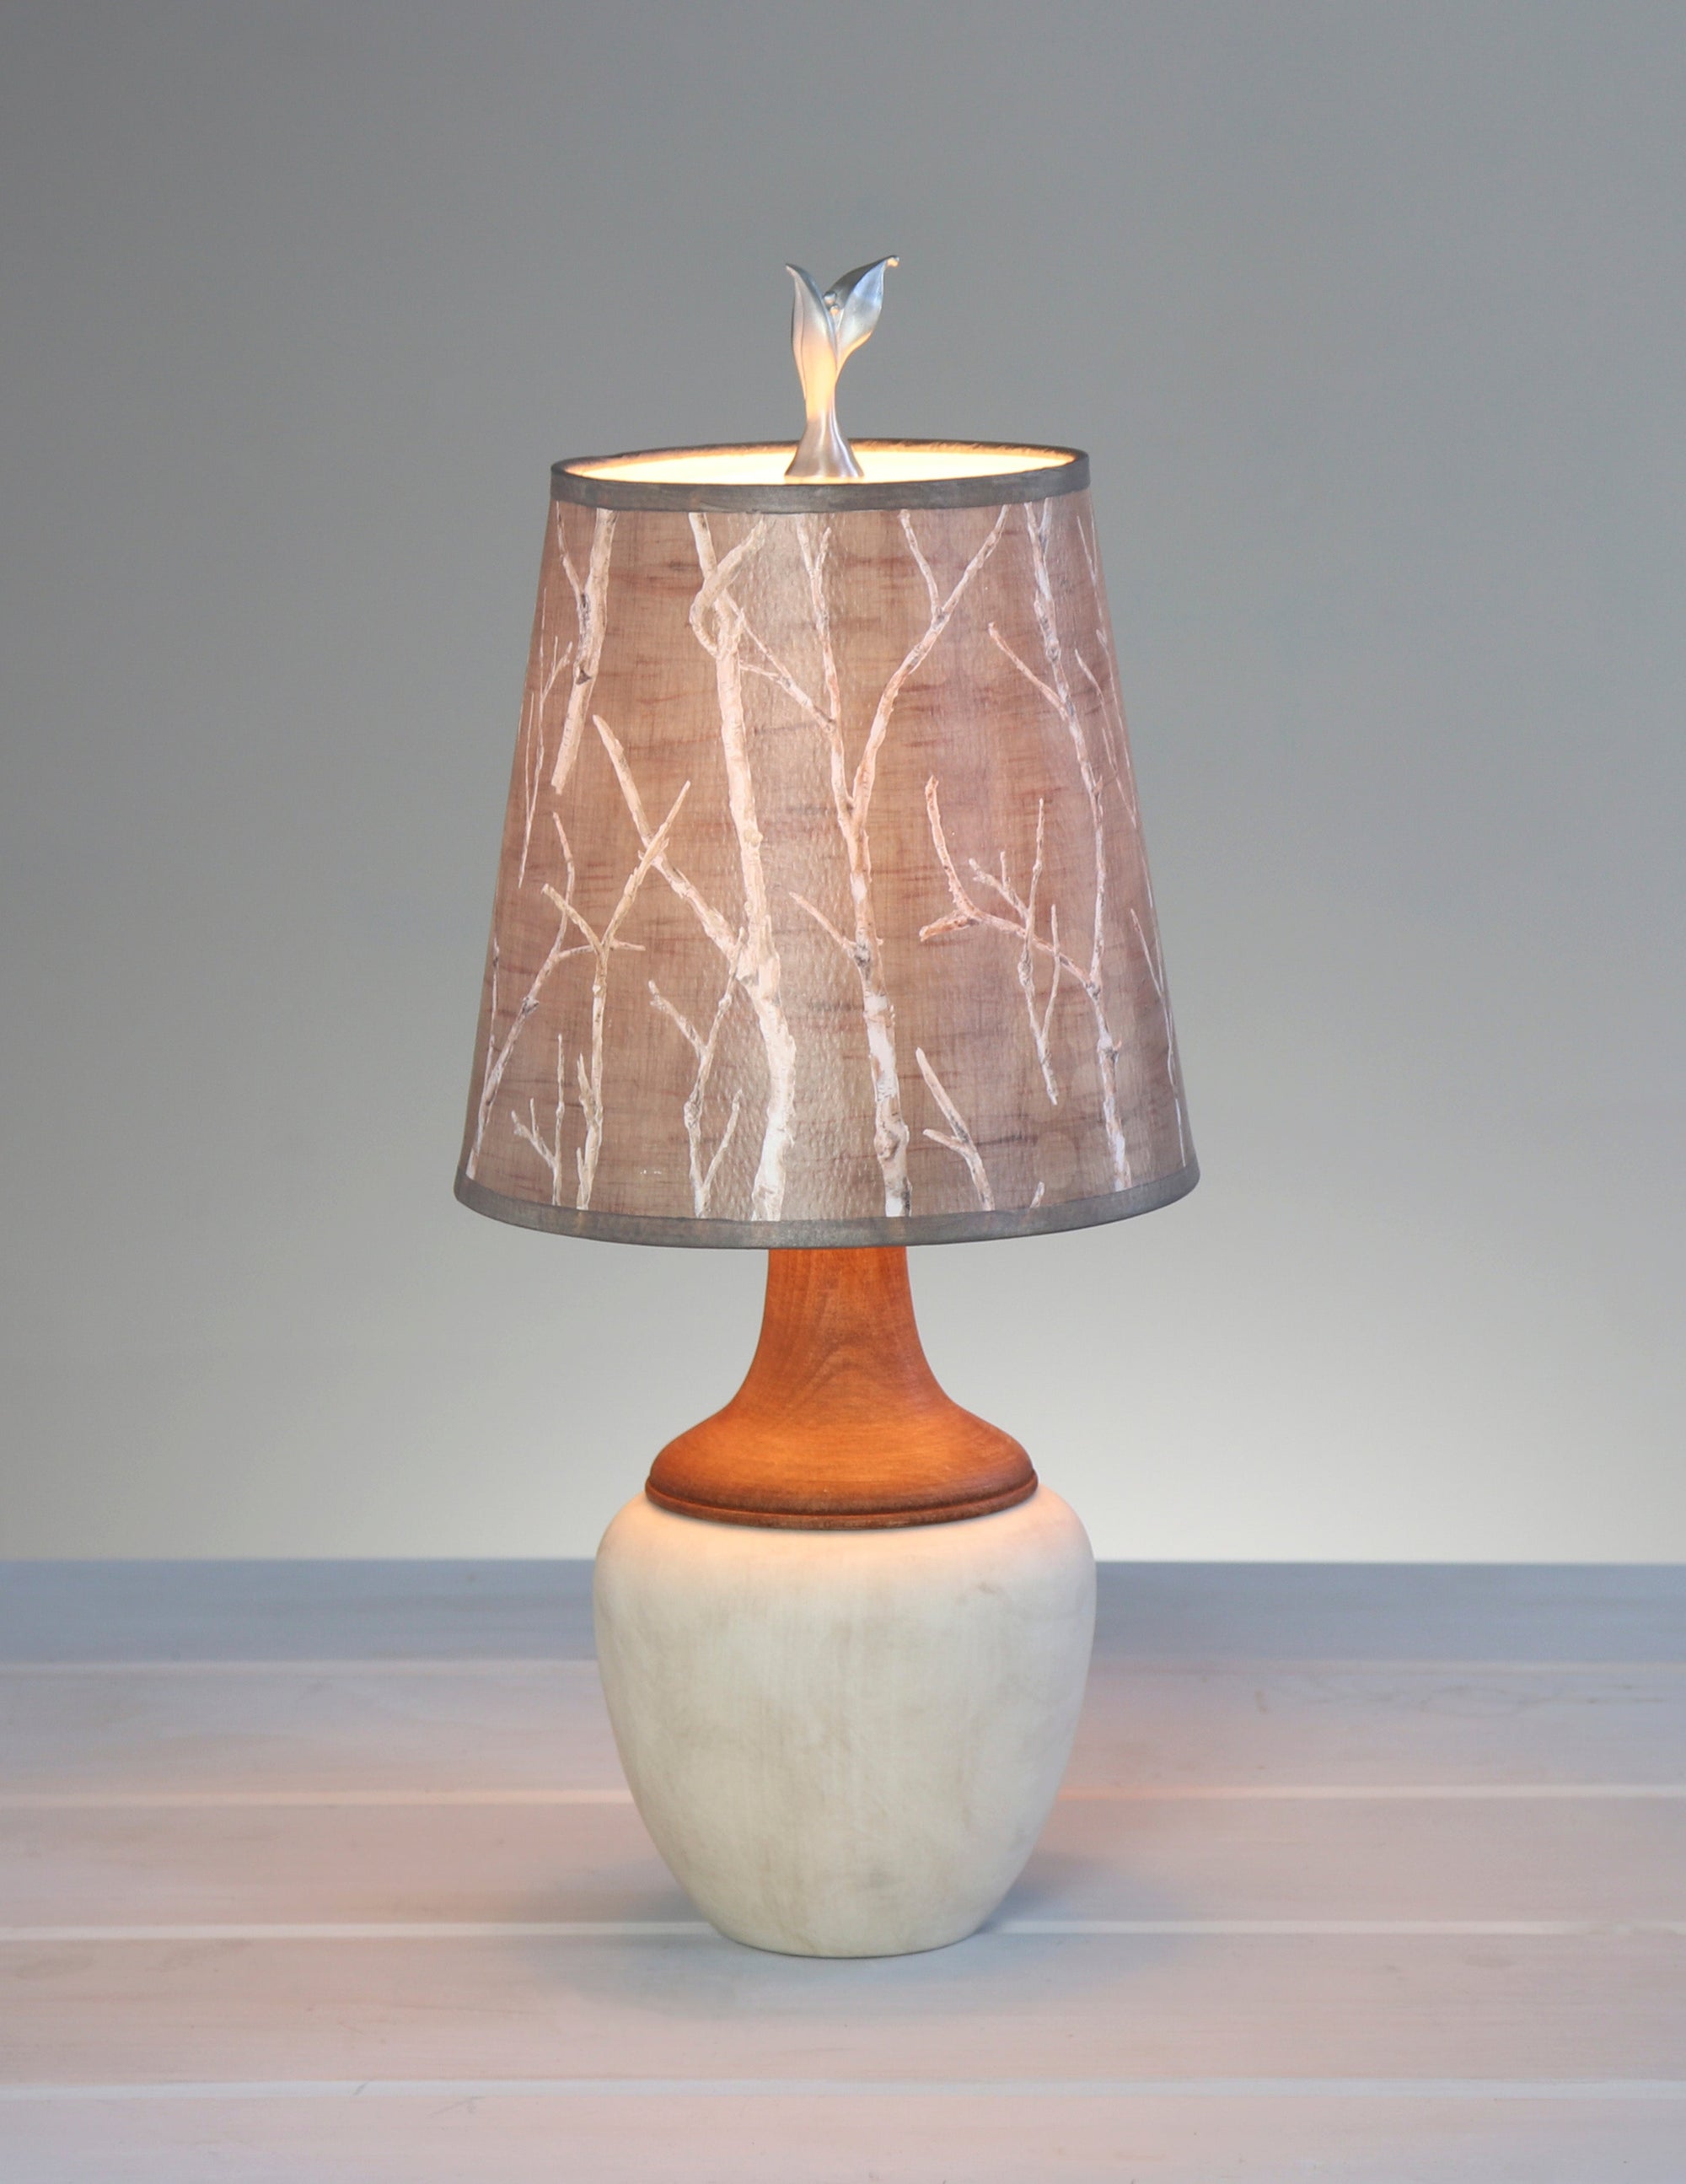 Janna Ugone & Co Table Lamps Ceramic and Maple Table Lamp with Small Drum Shade in Twigs